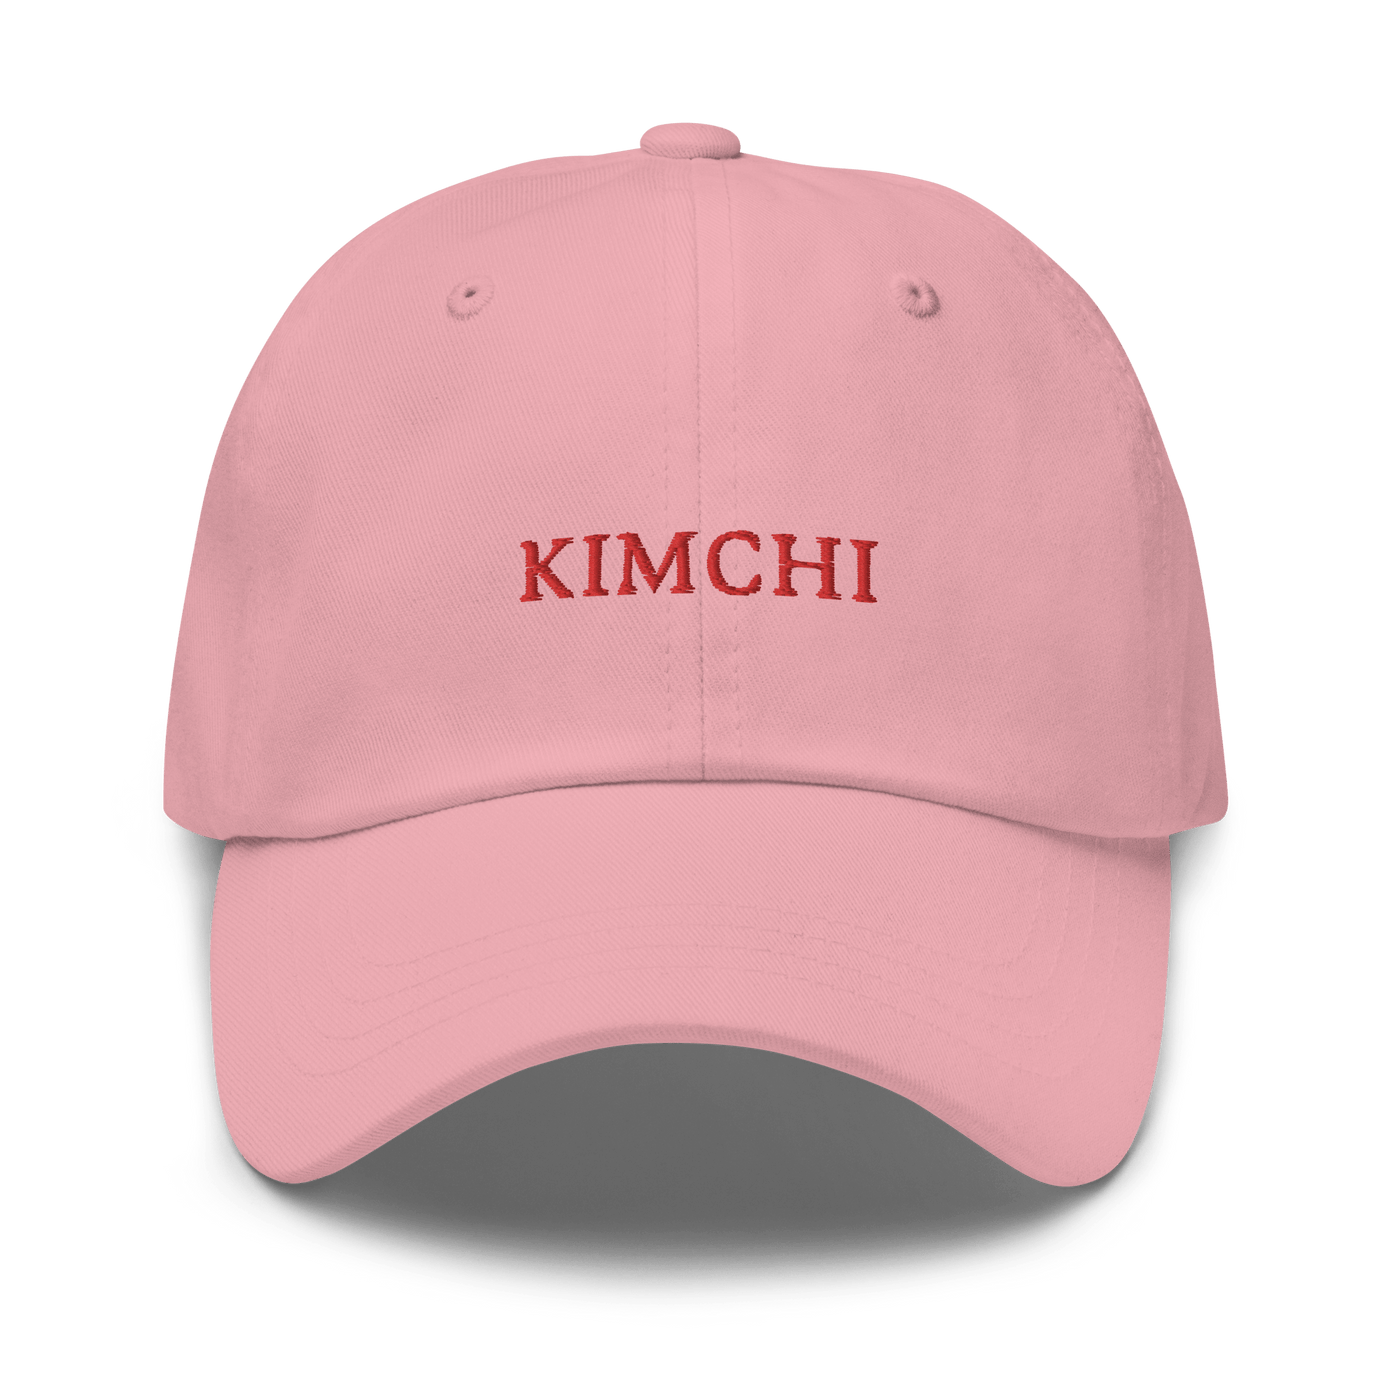 Kimchi Dad hat - Pink - - Just Another Cap Store